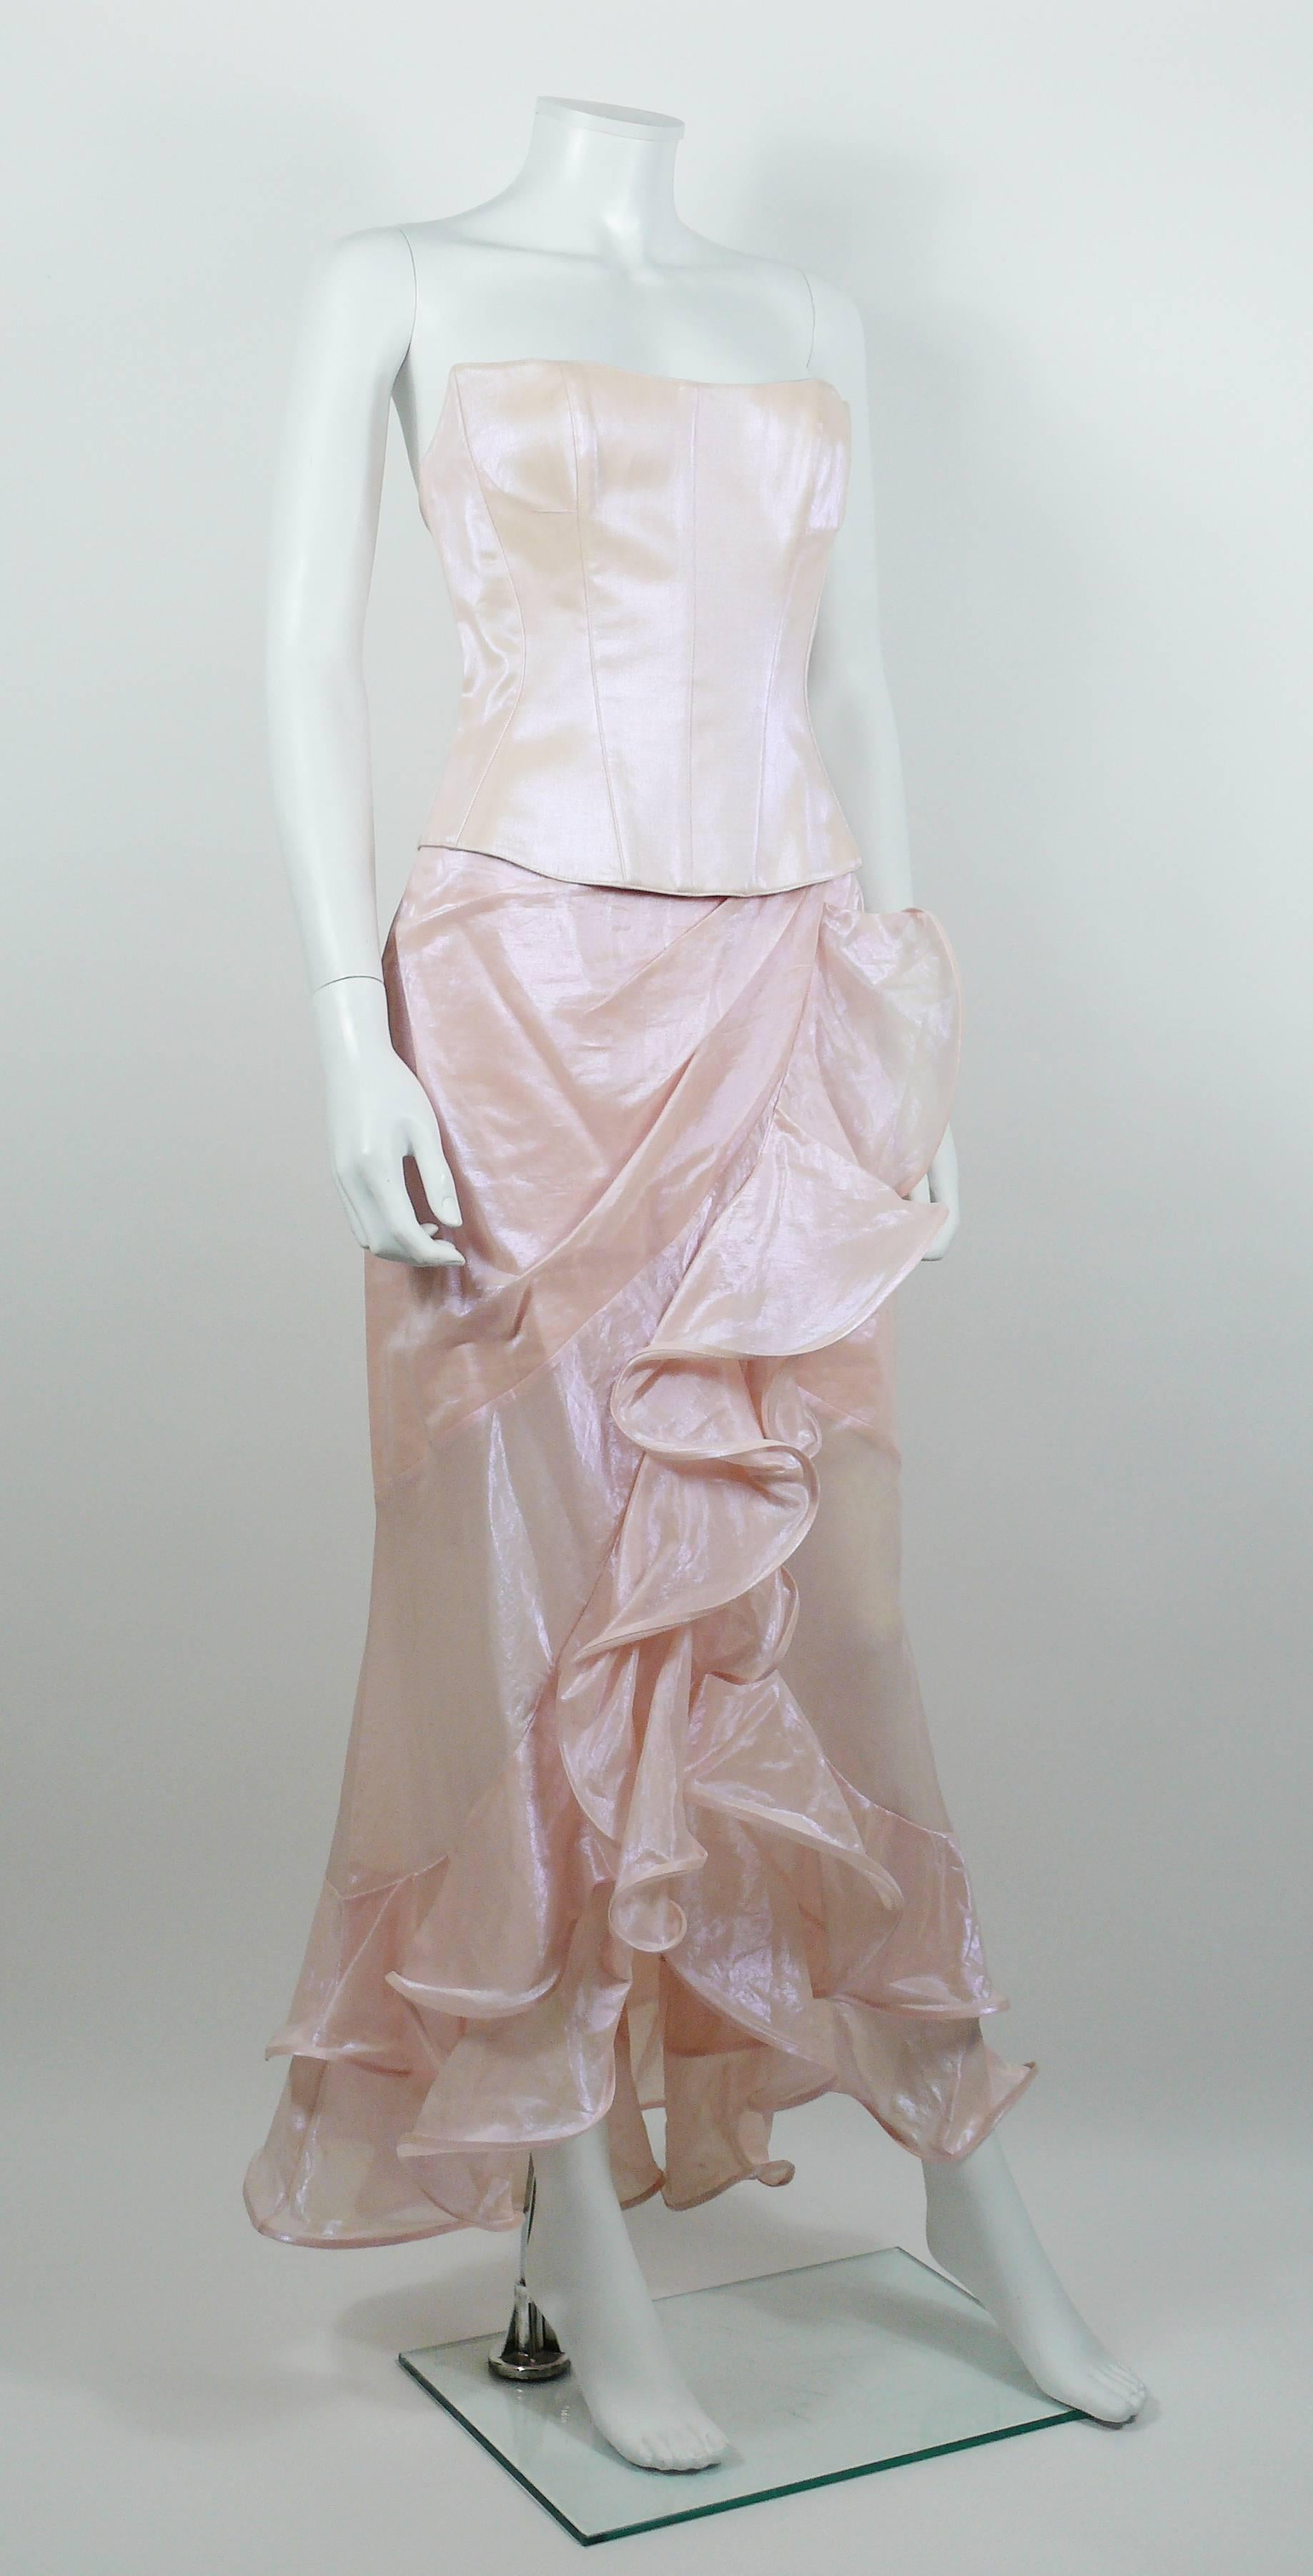 THIERRY MUGLER Couture vintage iridescent pink two piece suit featuring a bustier corset top and a ruffled wrap long skirt.

BUSTIER features :
- Fully lined.
- Whalebones.
- Hidden snap and hook back closure.

SKIRT features :
- Wrap cut.
-